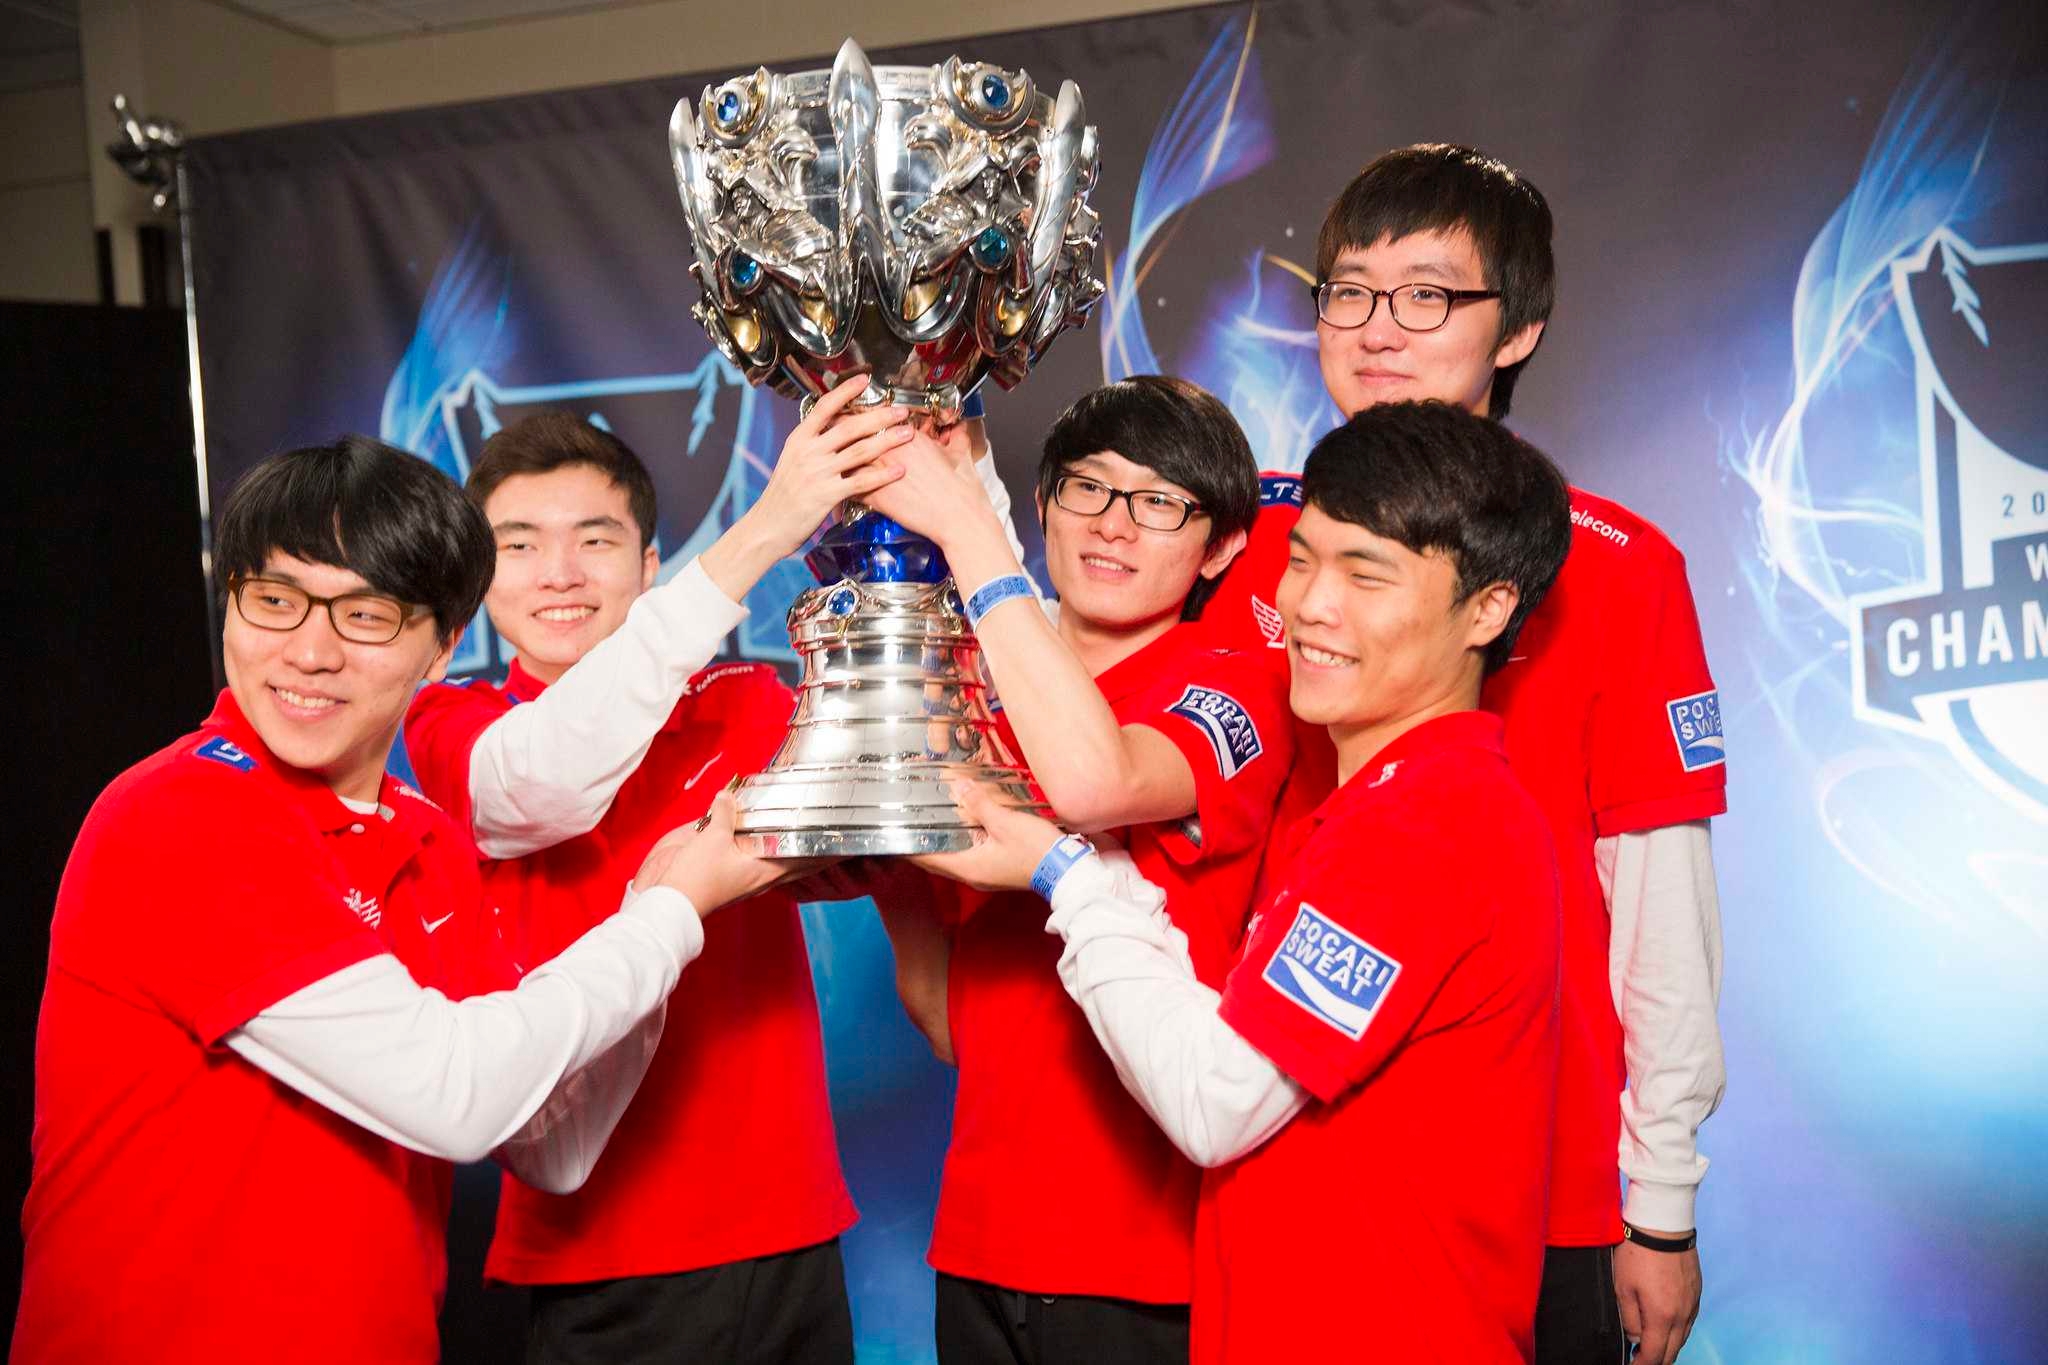 Full Opening Ceremony of League of Legends Season 4 World Championship 2014  in Seoul, South Korea! 